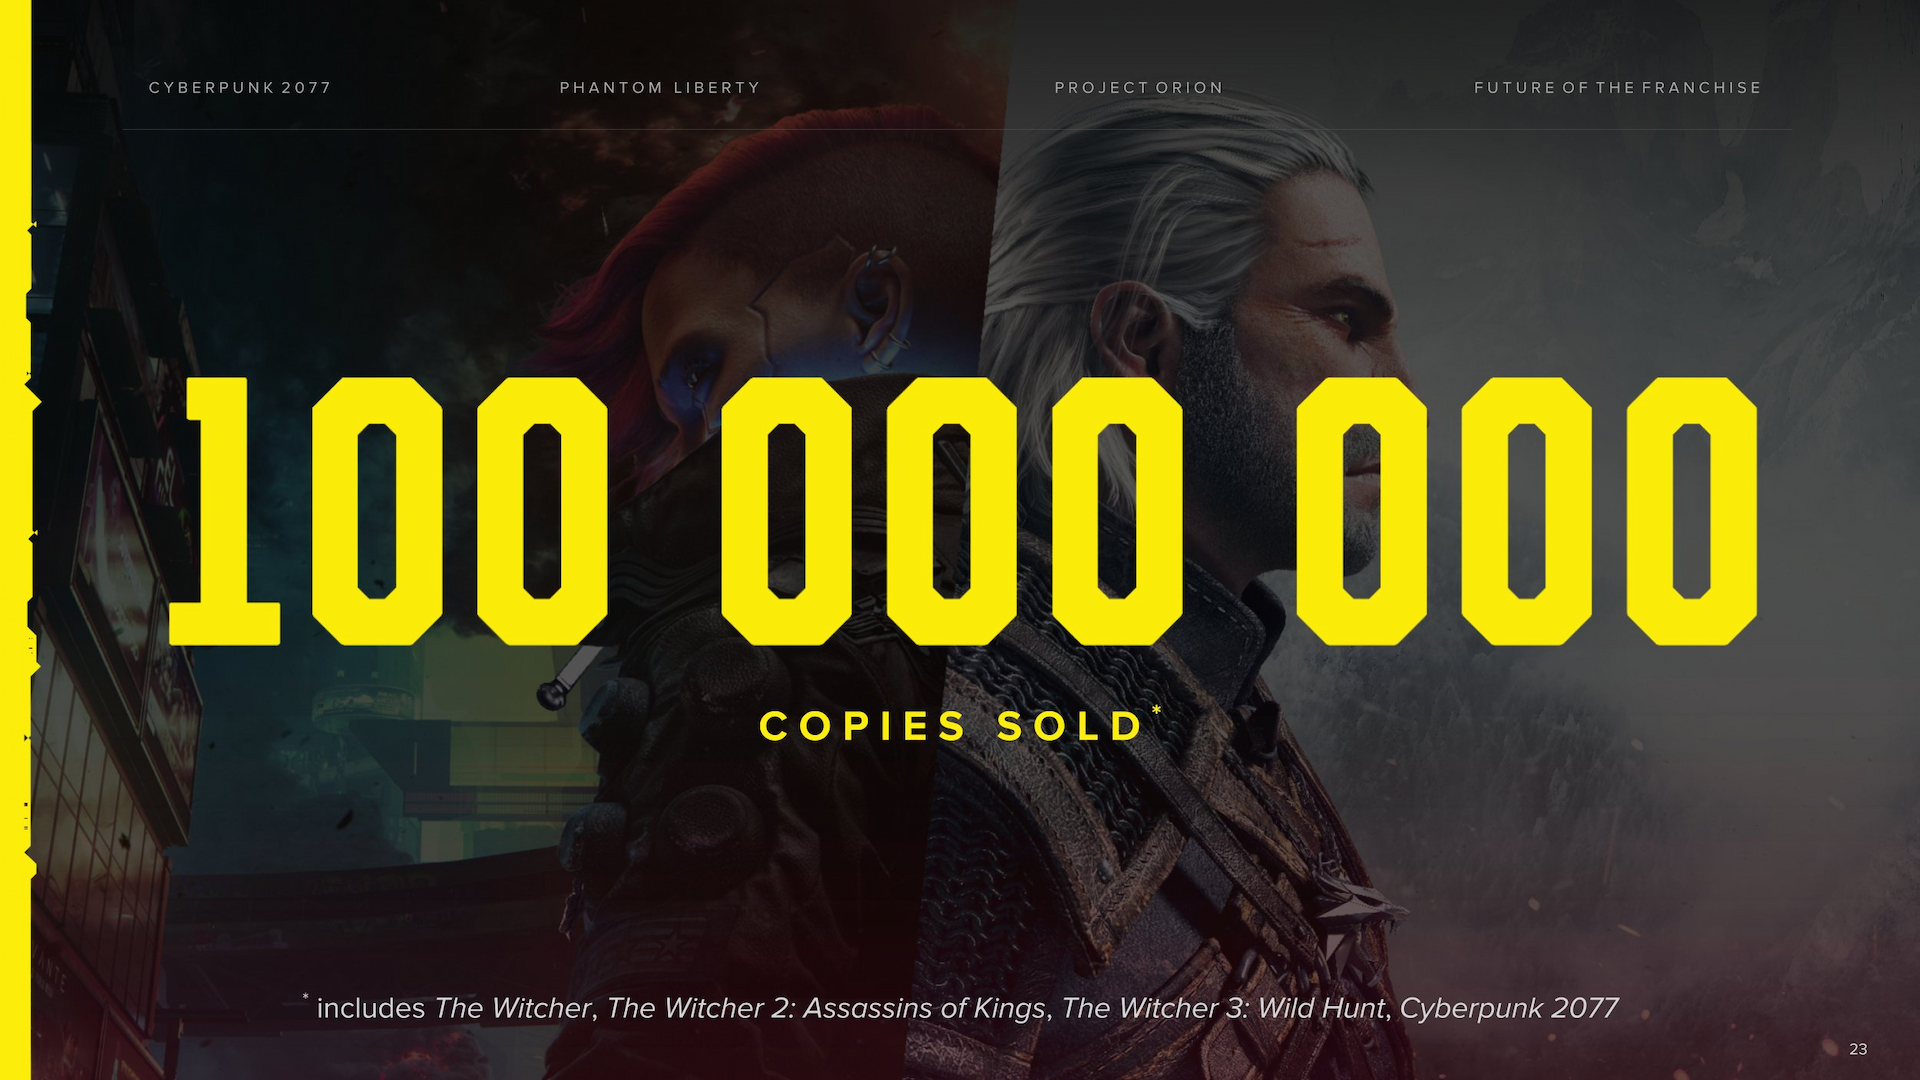 An image showing CD Projekt Red's number of sales, 100,000,000